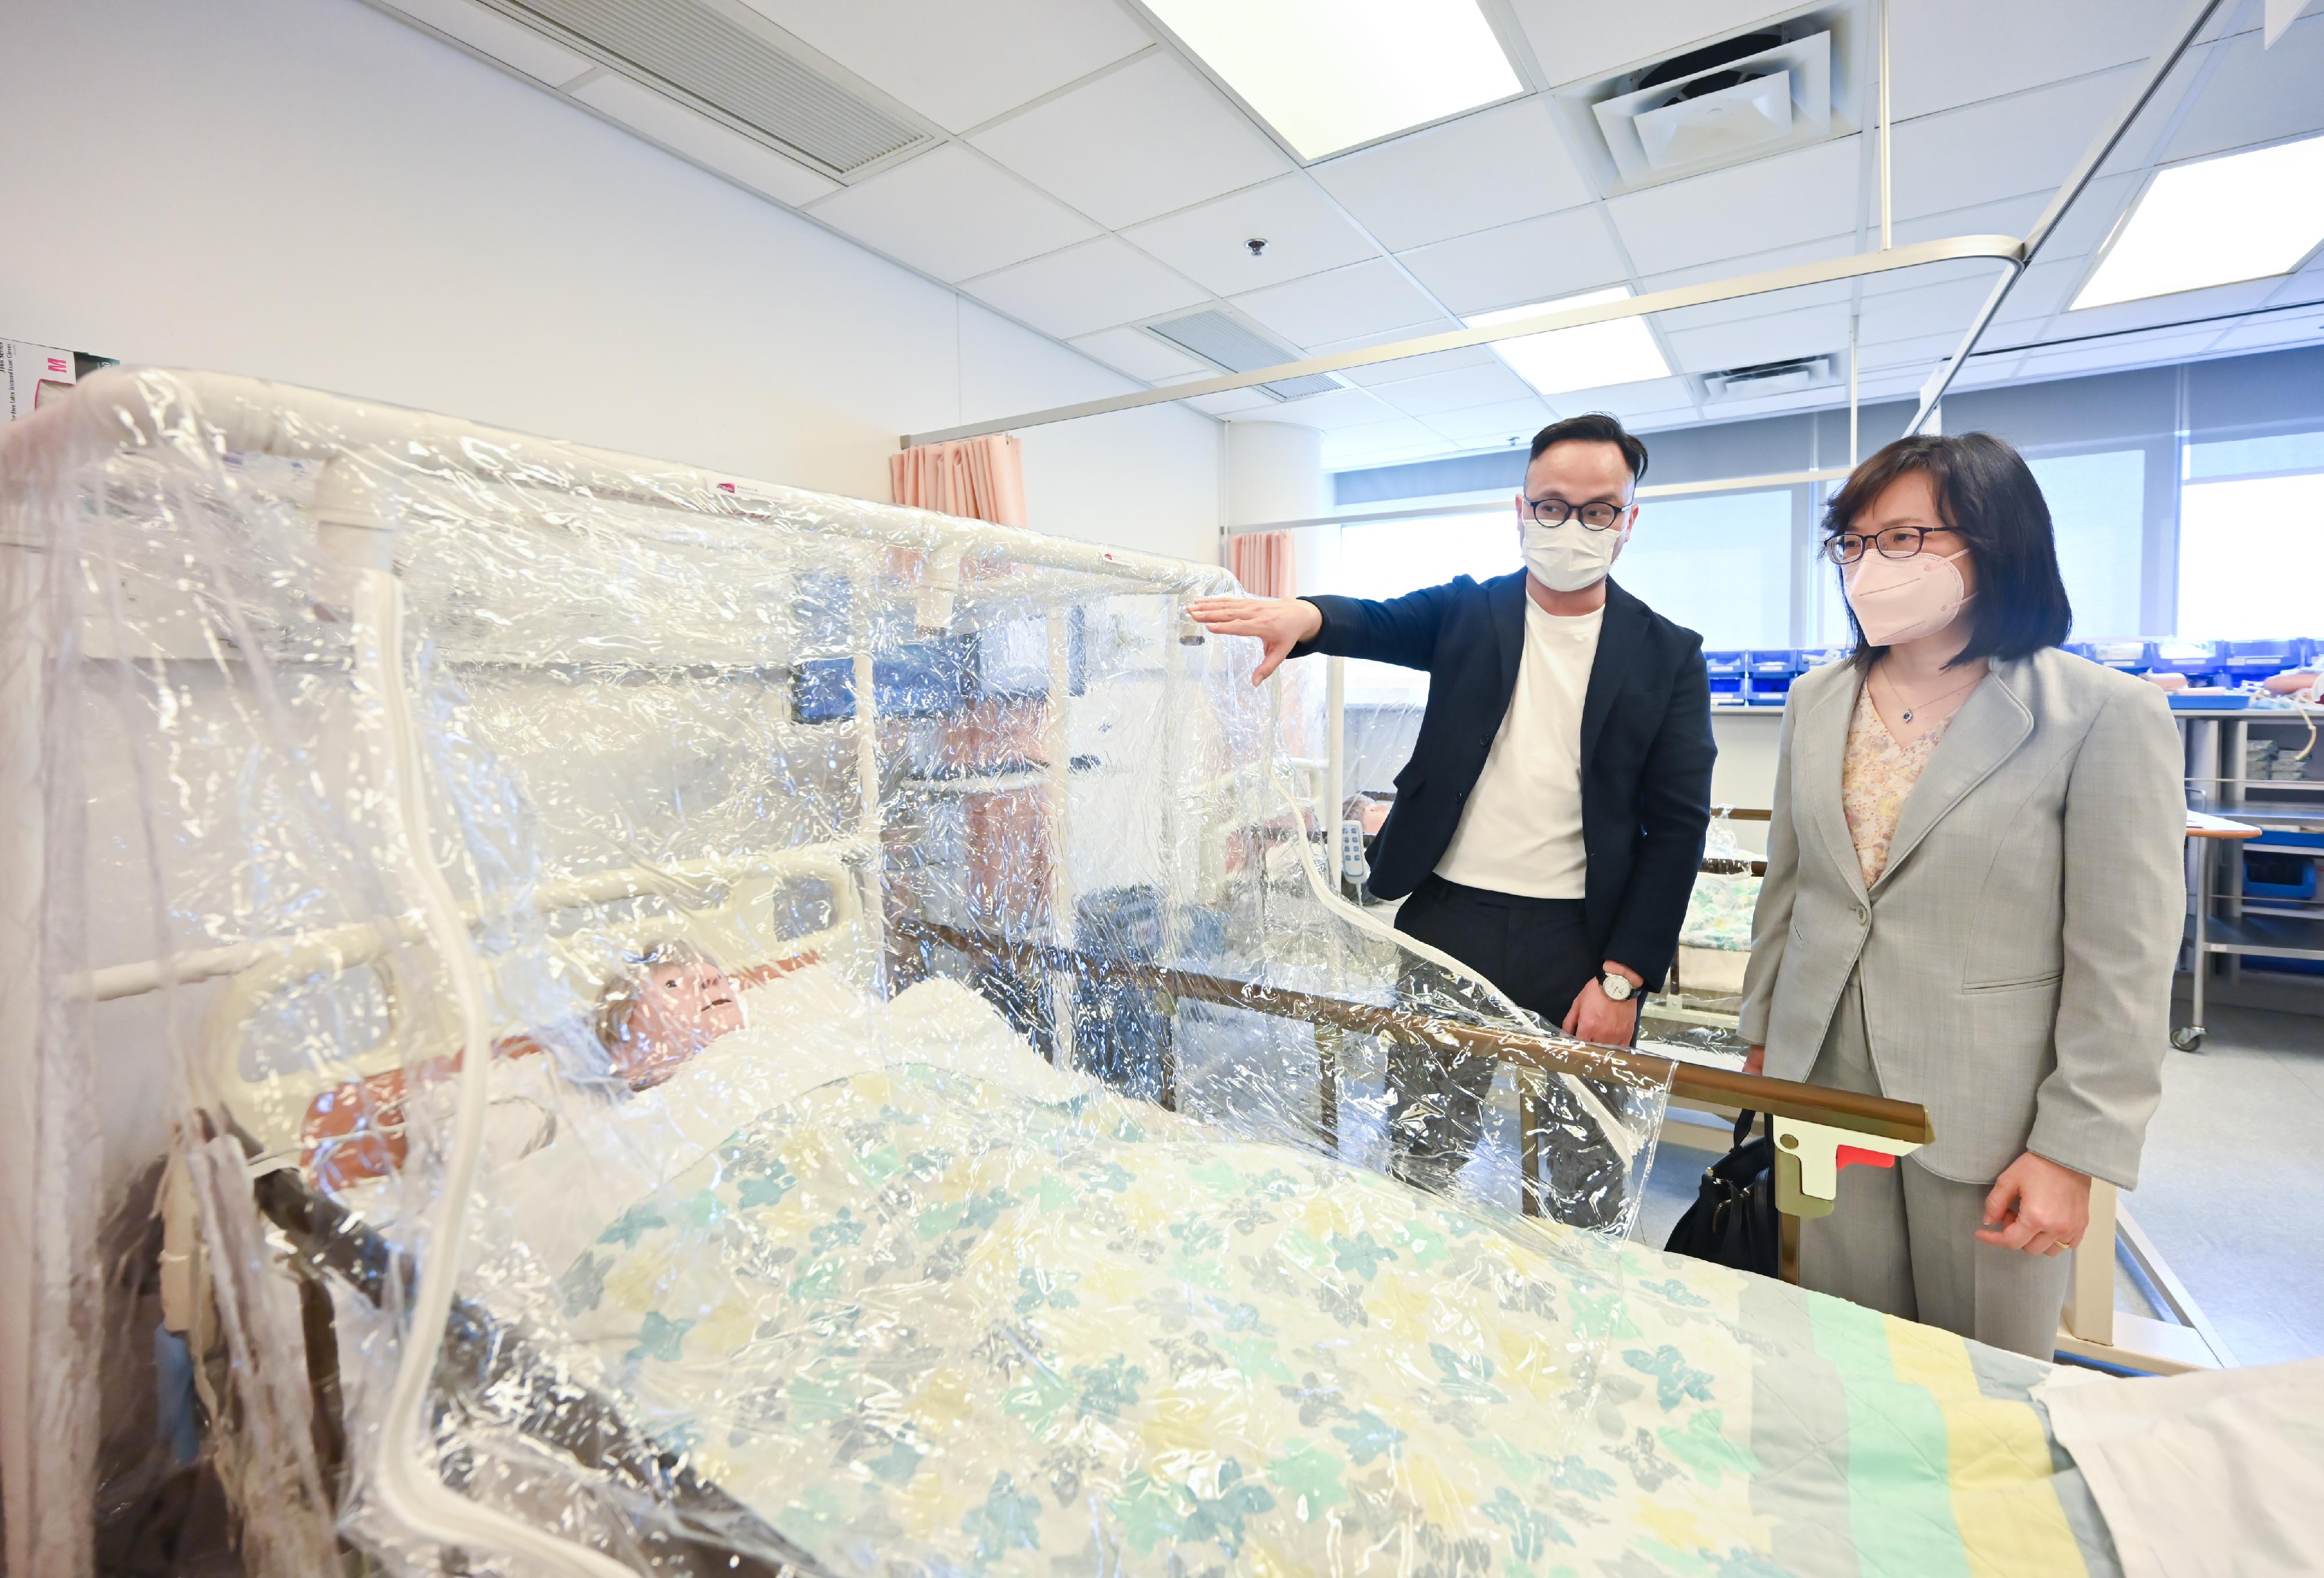 The Commissioner for Innovation and Technology, Ms Rebecca Pun (right), visits the Clinical Simulation Centre of the School of Nursing of the University of Hong Kong on April 29 to learn more about the trial of a fast-track vented enclosure system for COVID-19 patients in hospitals developed by City University of Hong Kong.